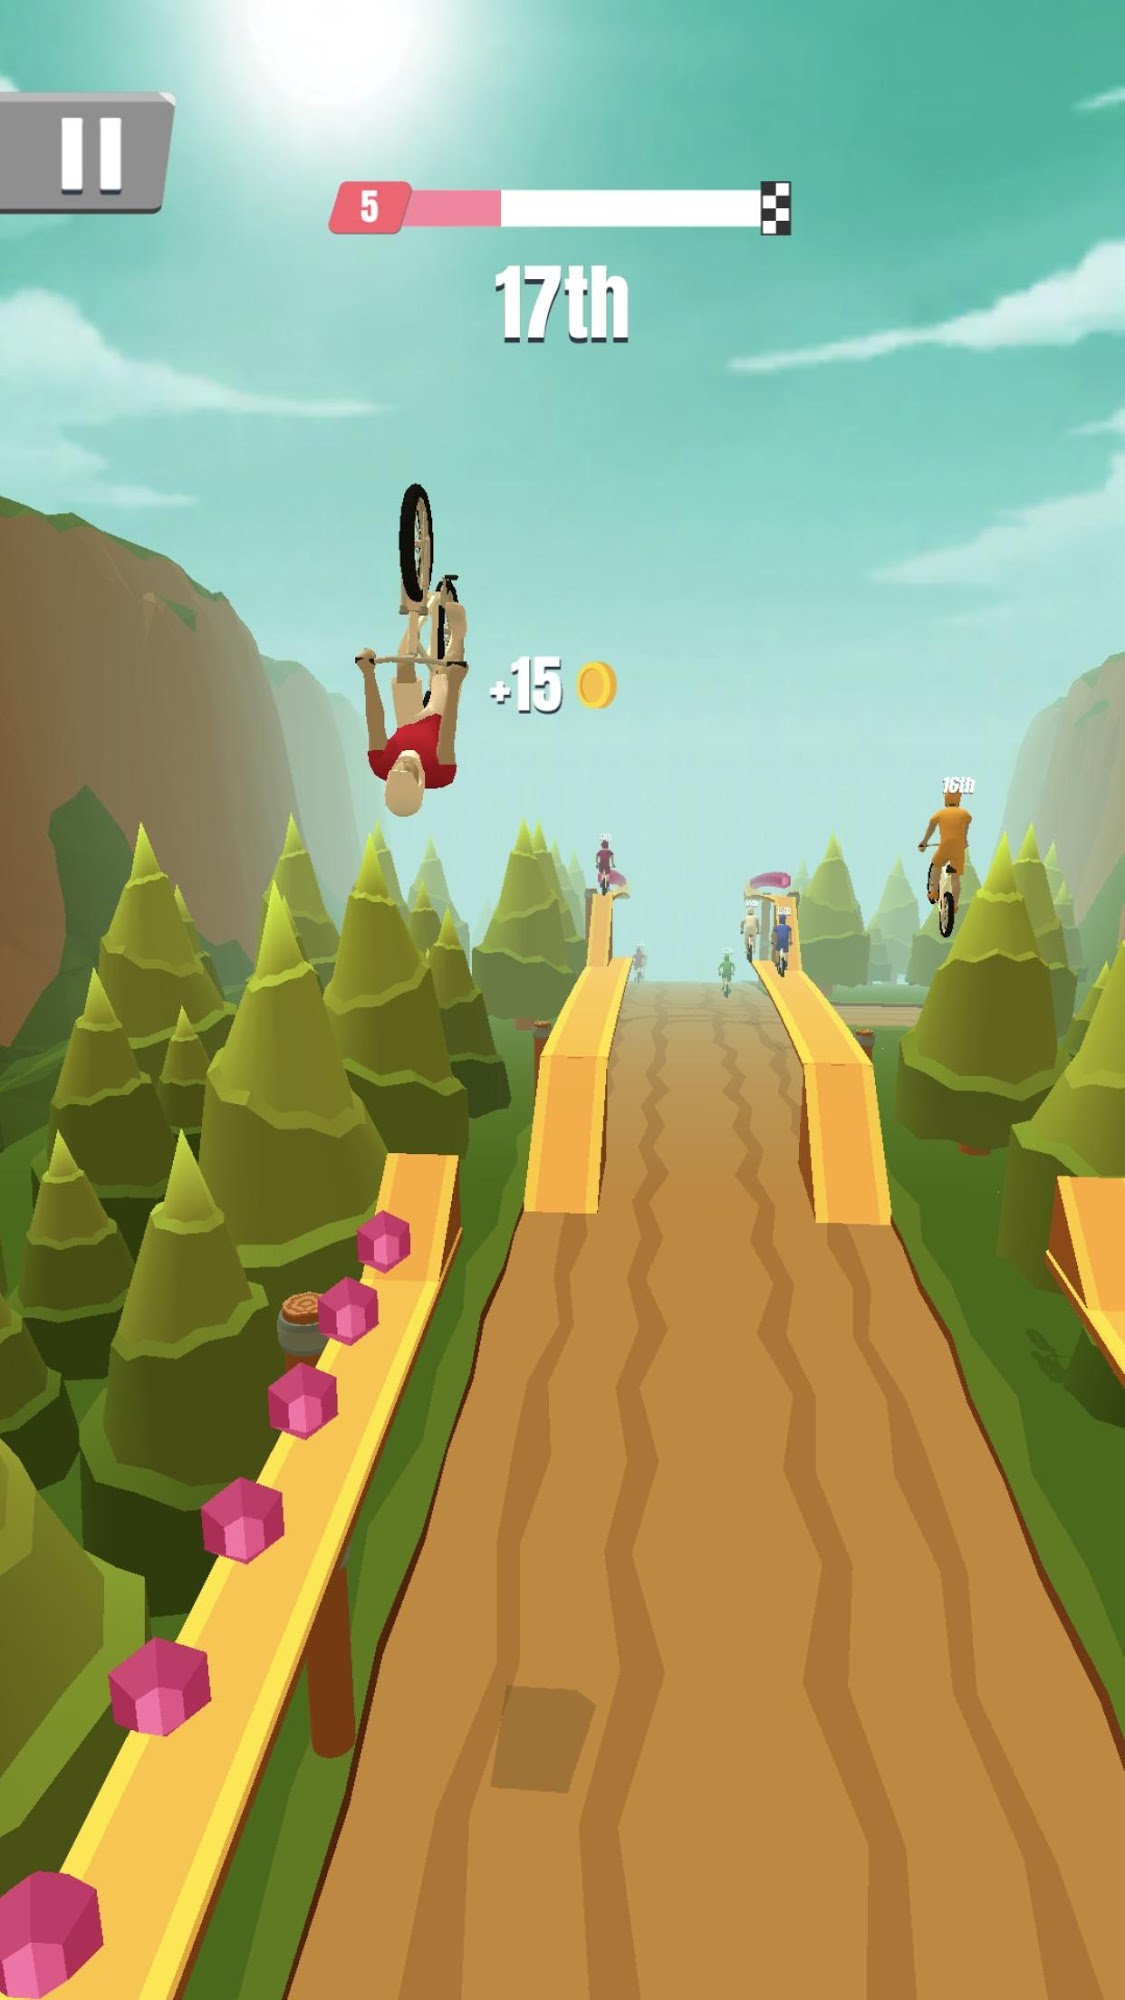 Bike Rush for Android